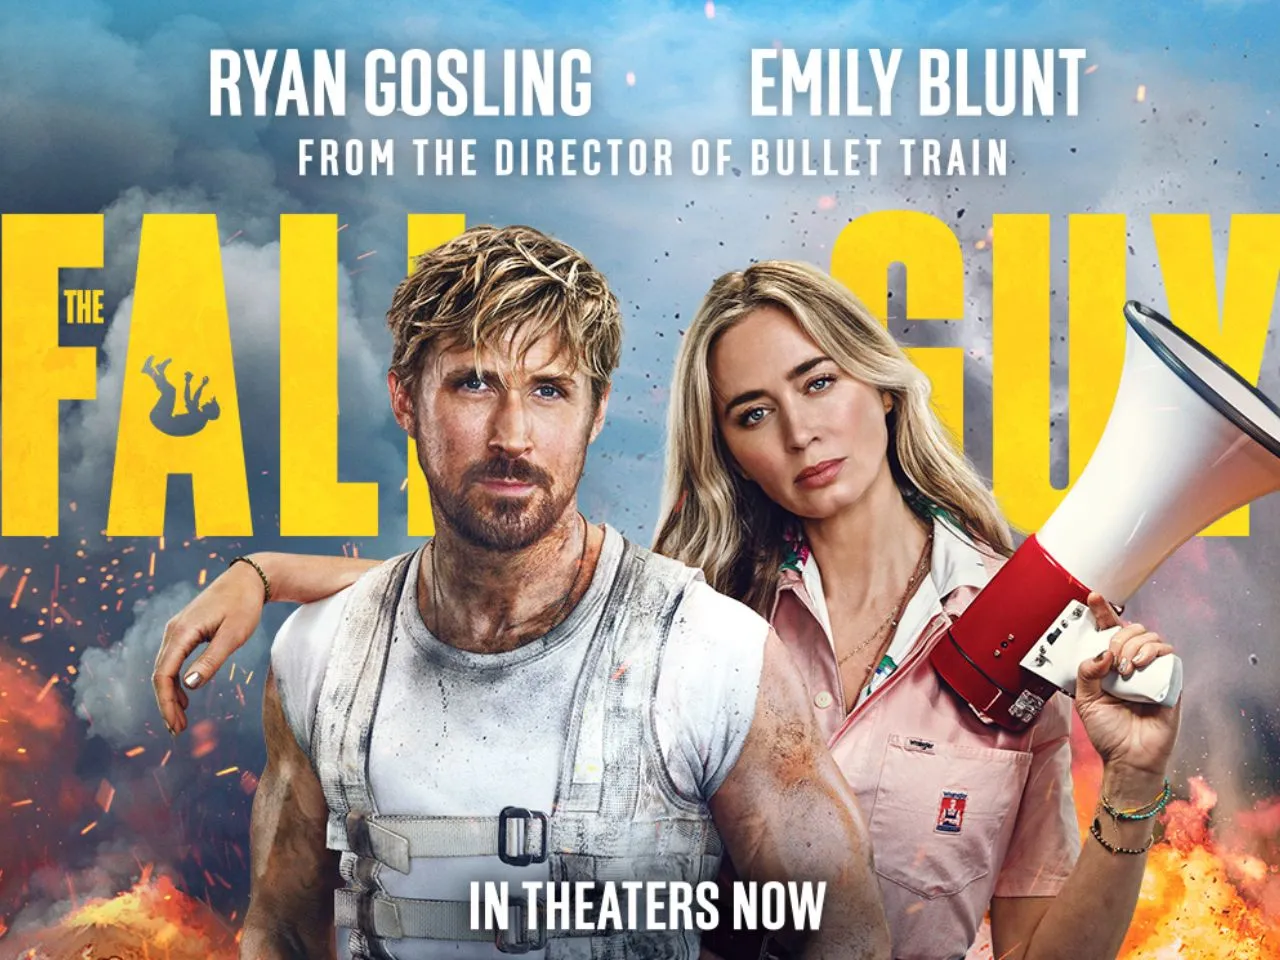 The Fall Guy review: Fun entertainer filled with action, romance, and movie magic!